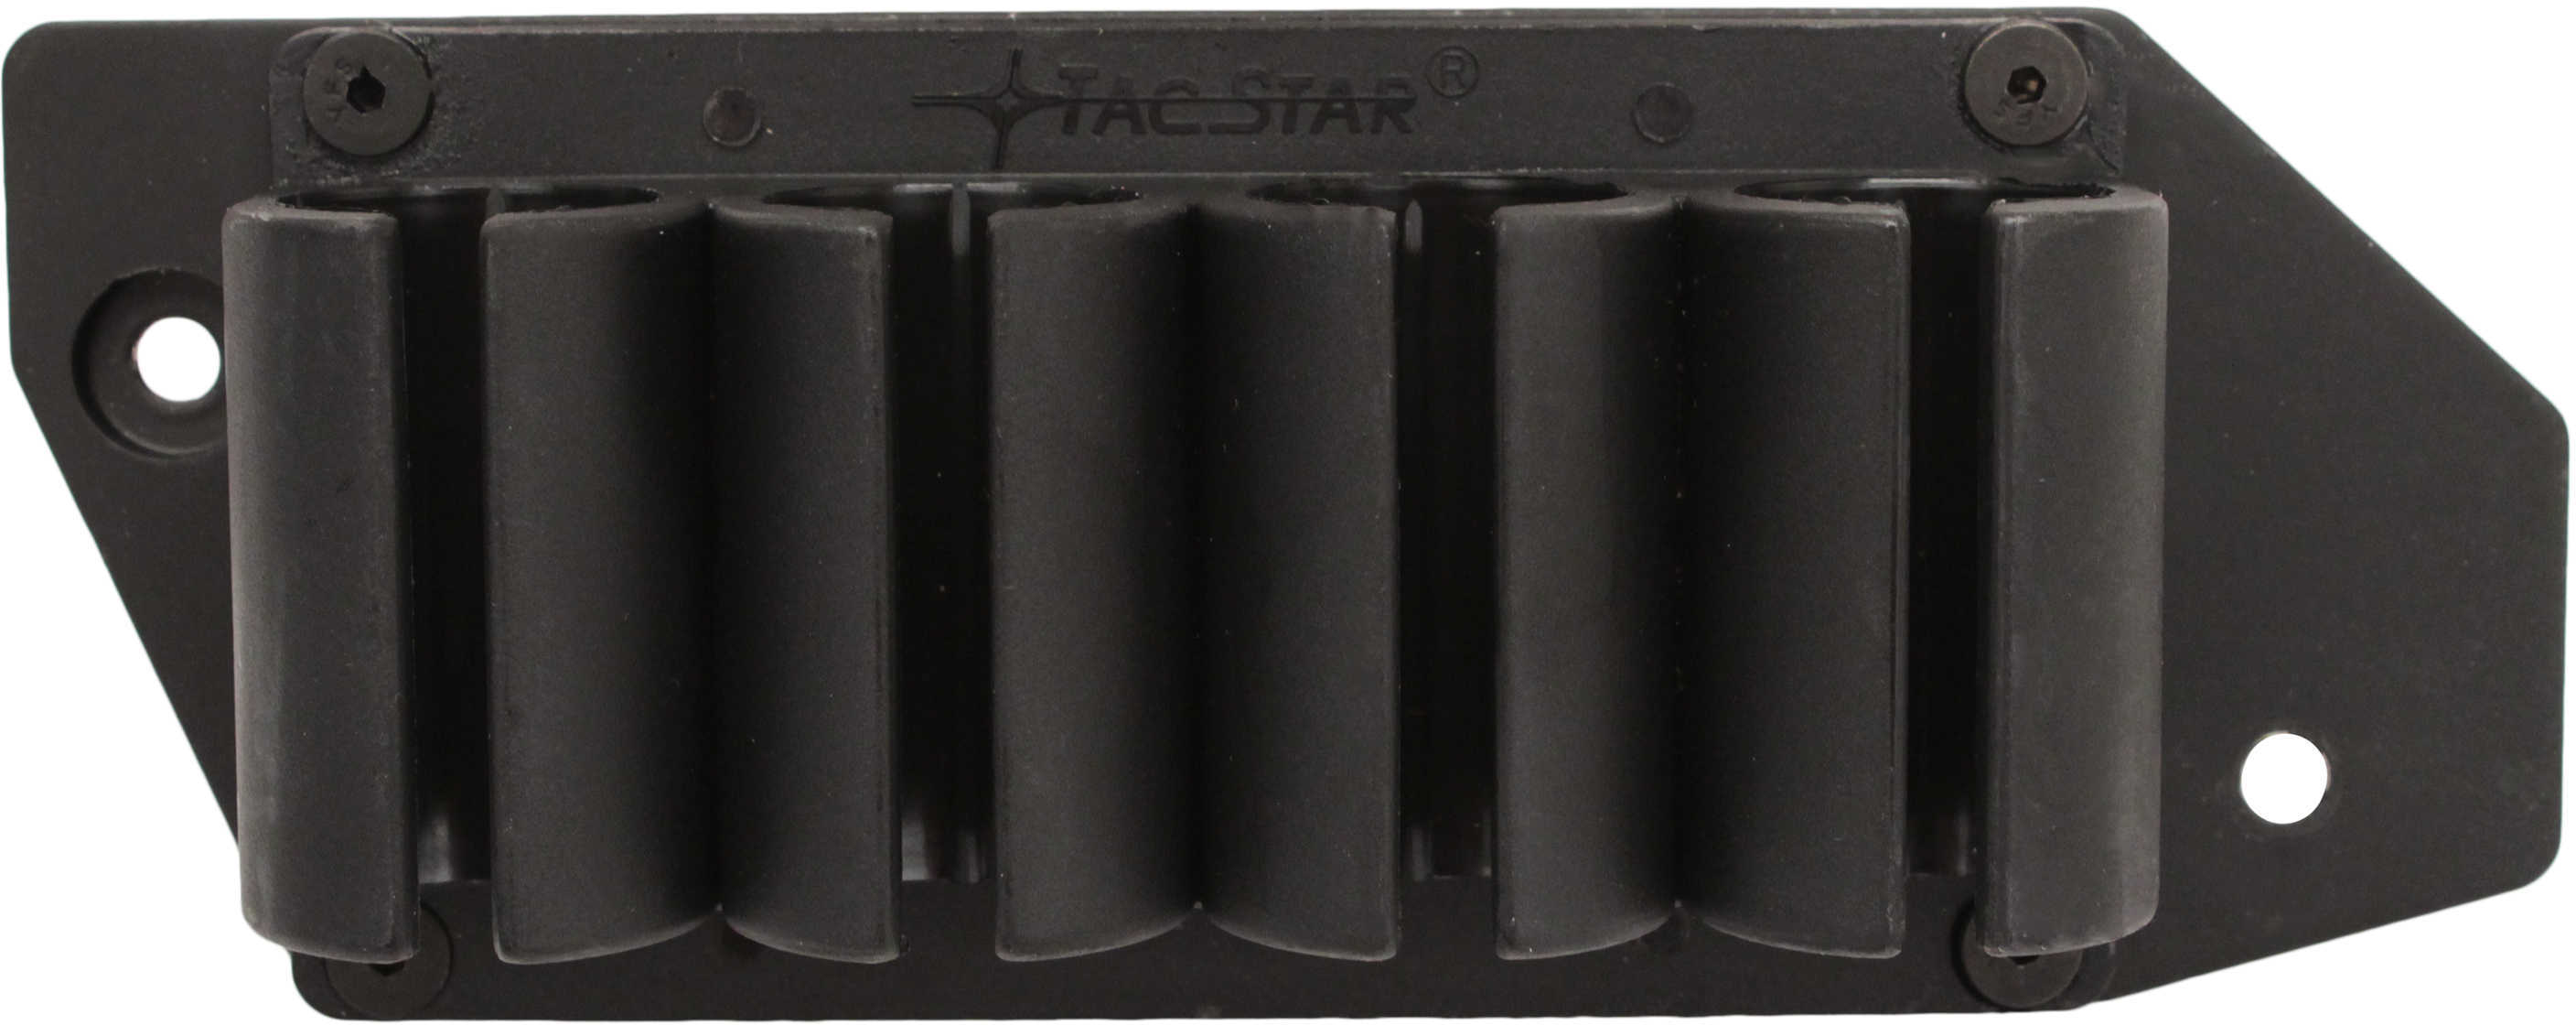 Pachmayr TacStar 20 Gauge 4 Rounds Sidesaddle Carrier For Mossberg 500 Md: 1081134